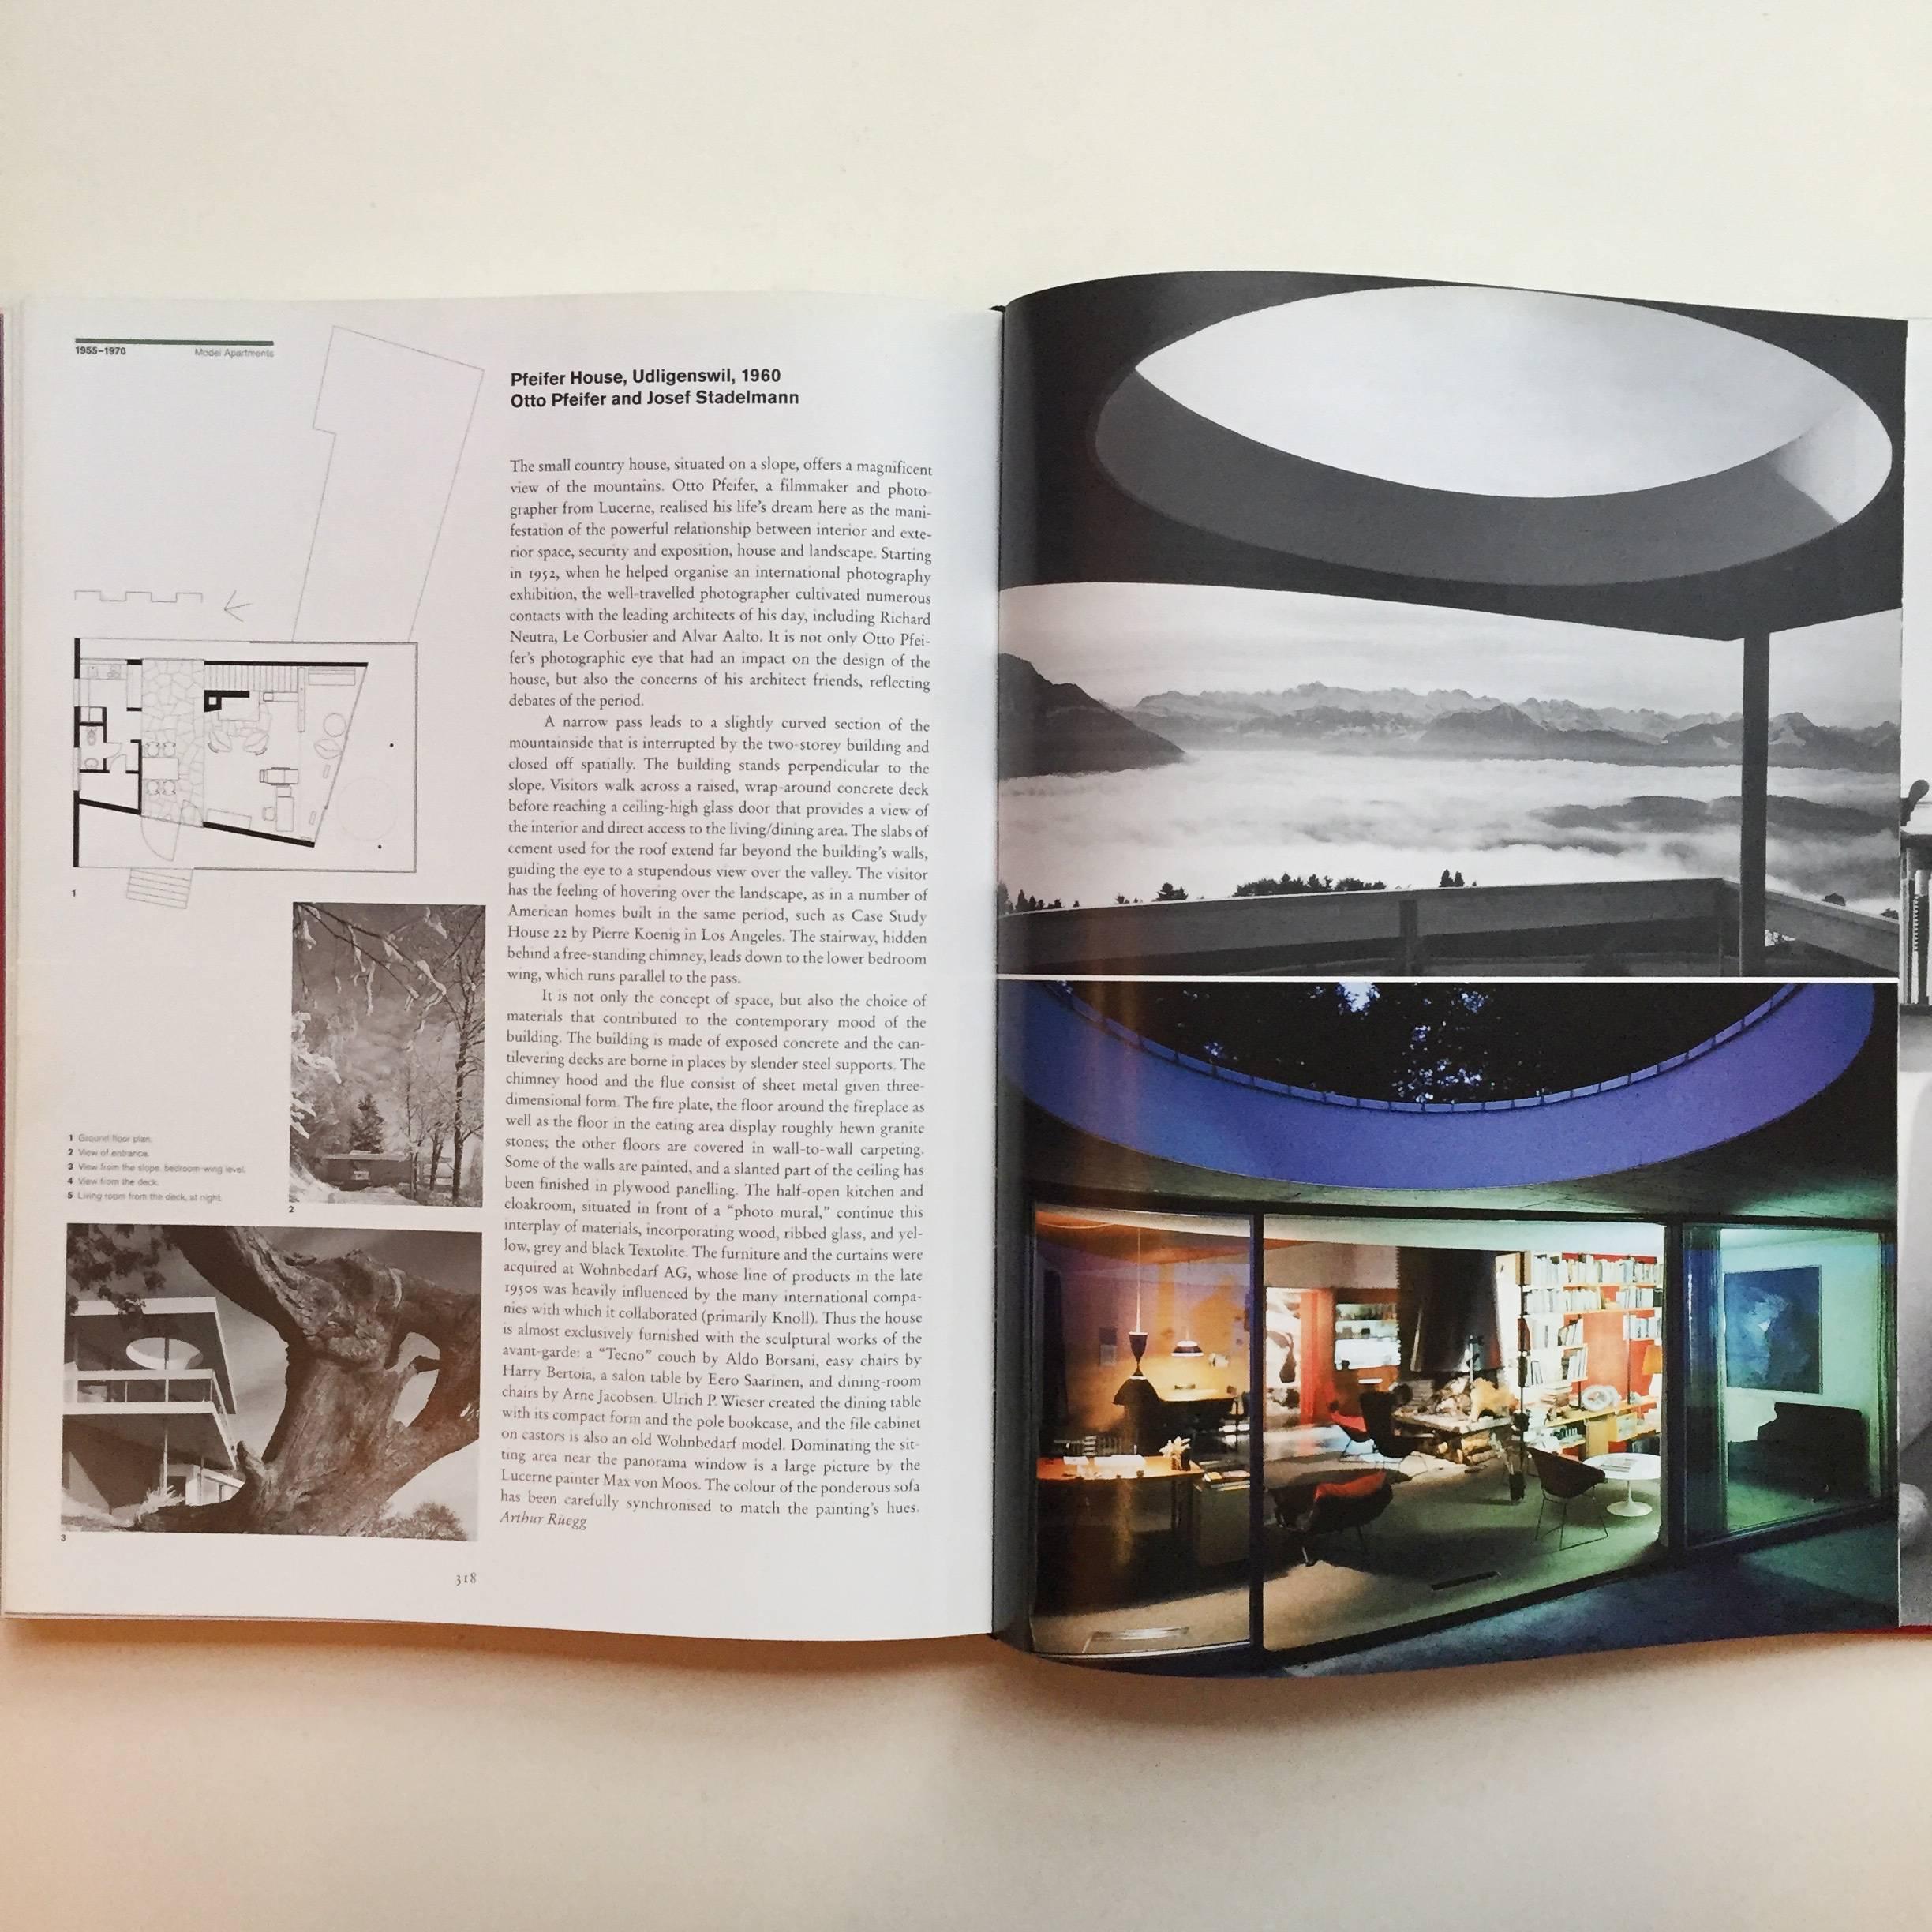 Swiss Furniture and Interiors in the 20th Century 1